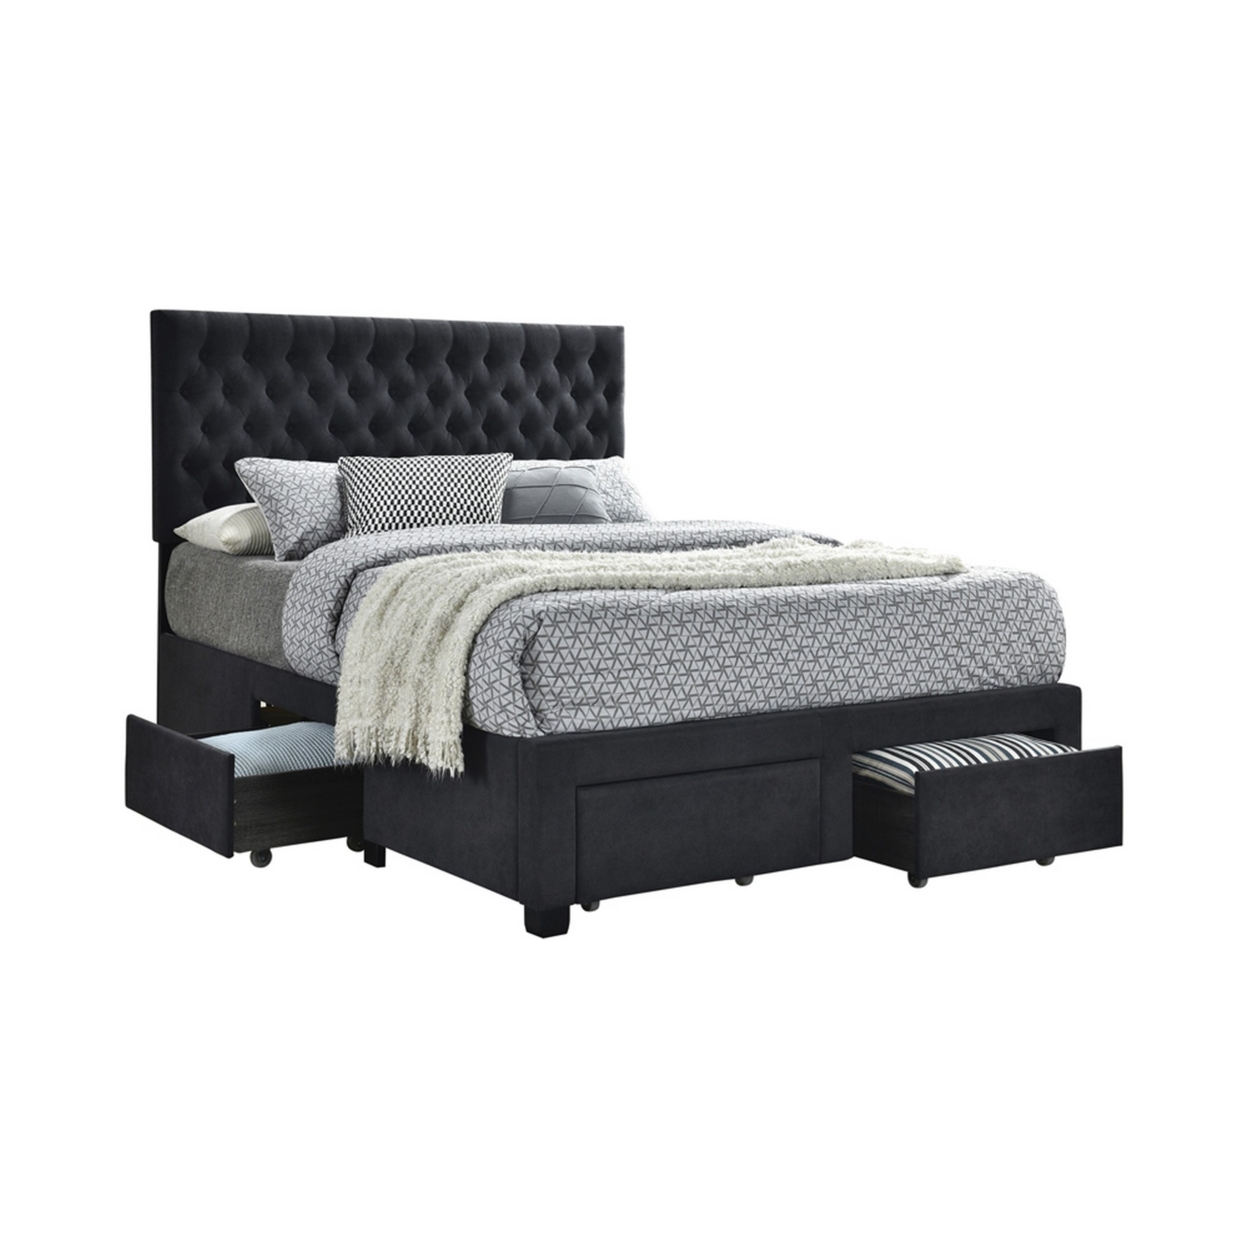 Fabric Upholstered Wooden Eastern King Size Bed With Bottom Drawers, Black- Saltoro Sherpi